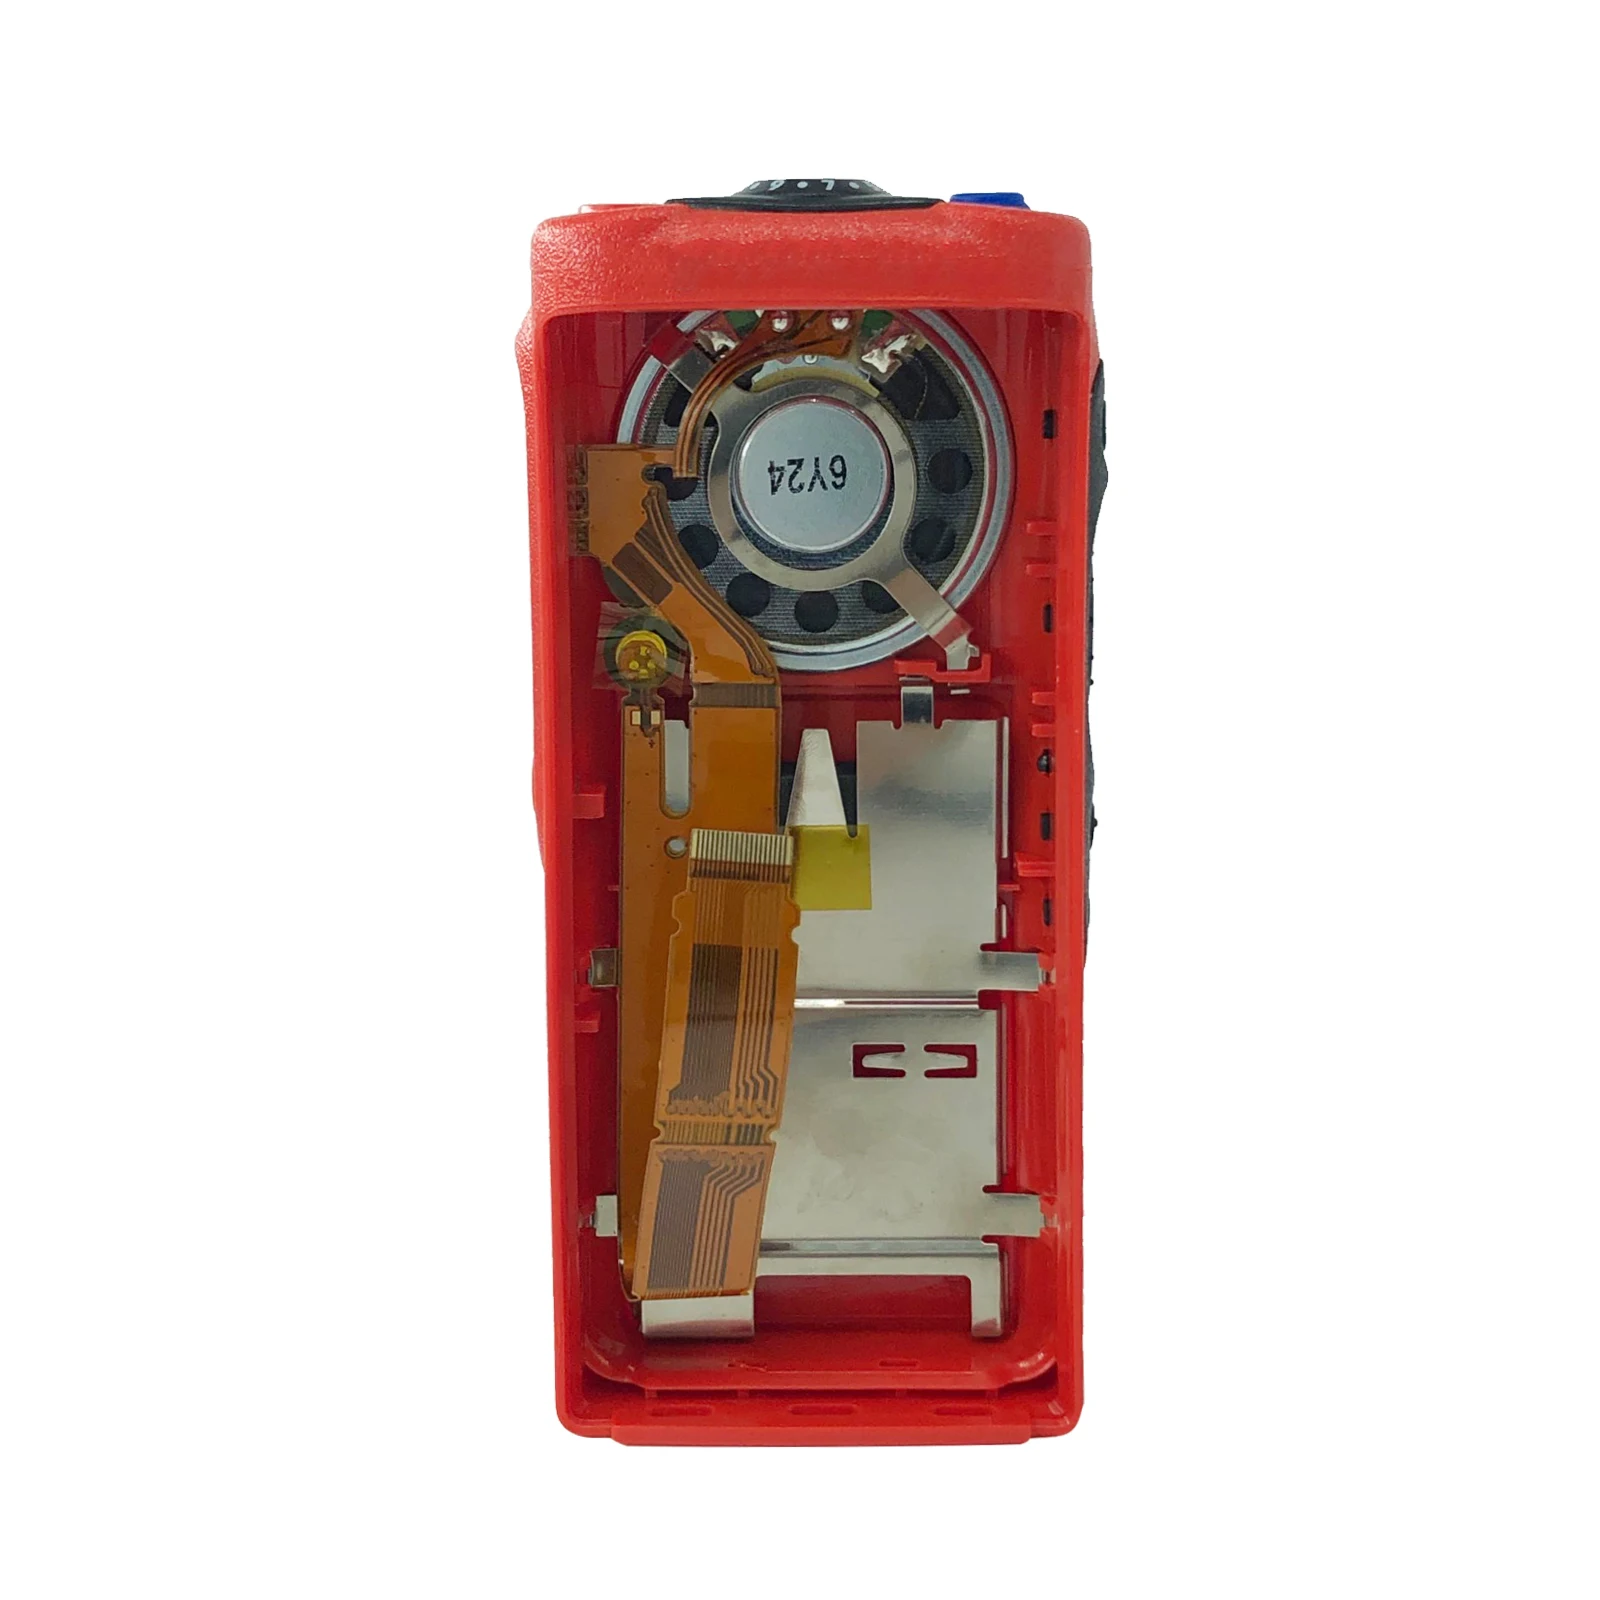 HT750 Red Replacement Housing Case Kit With Mic For GP340 GP328 Handheld Two-way Radio